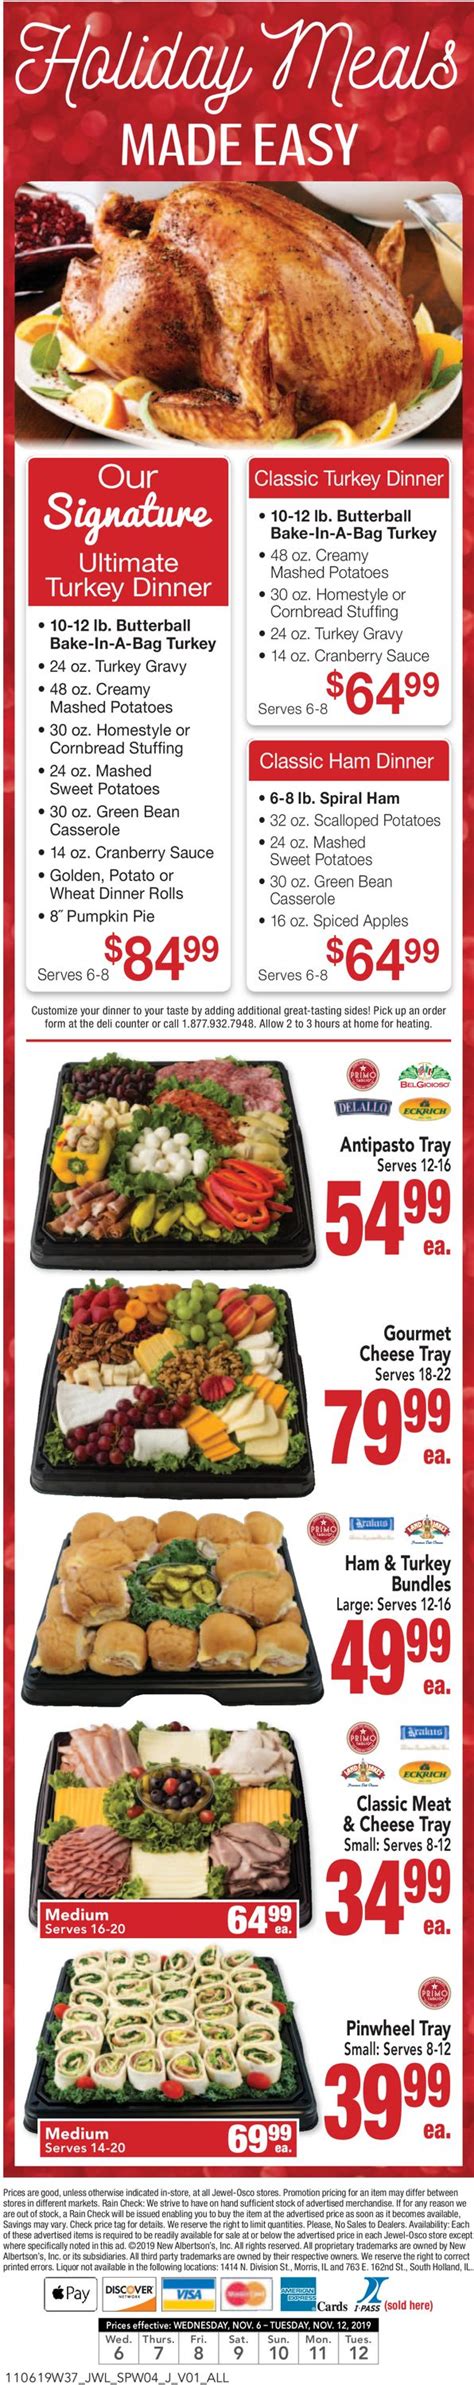 Before you tuck into the turkey, share a sentimental blessing over your food and family. Jewel Osco Current weekly ad 11/06 - 11/12/2019 4 - frequent-ads.com